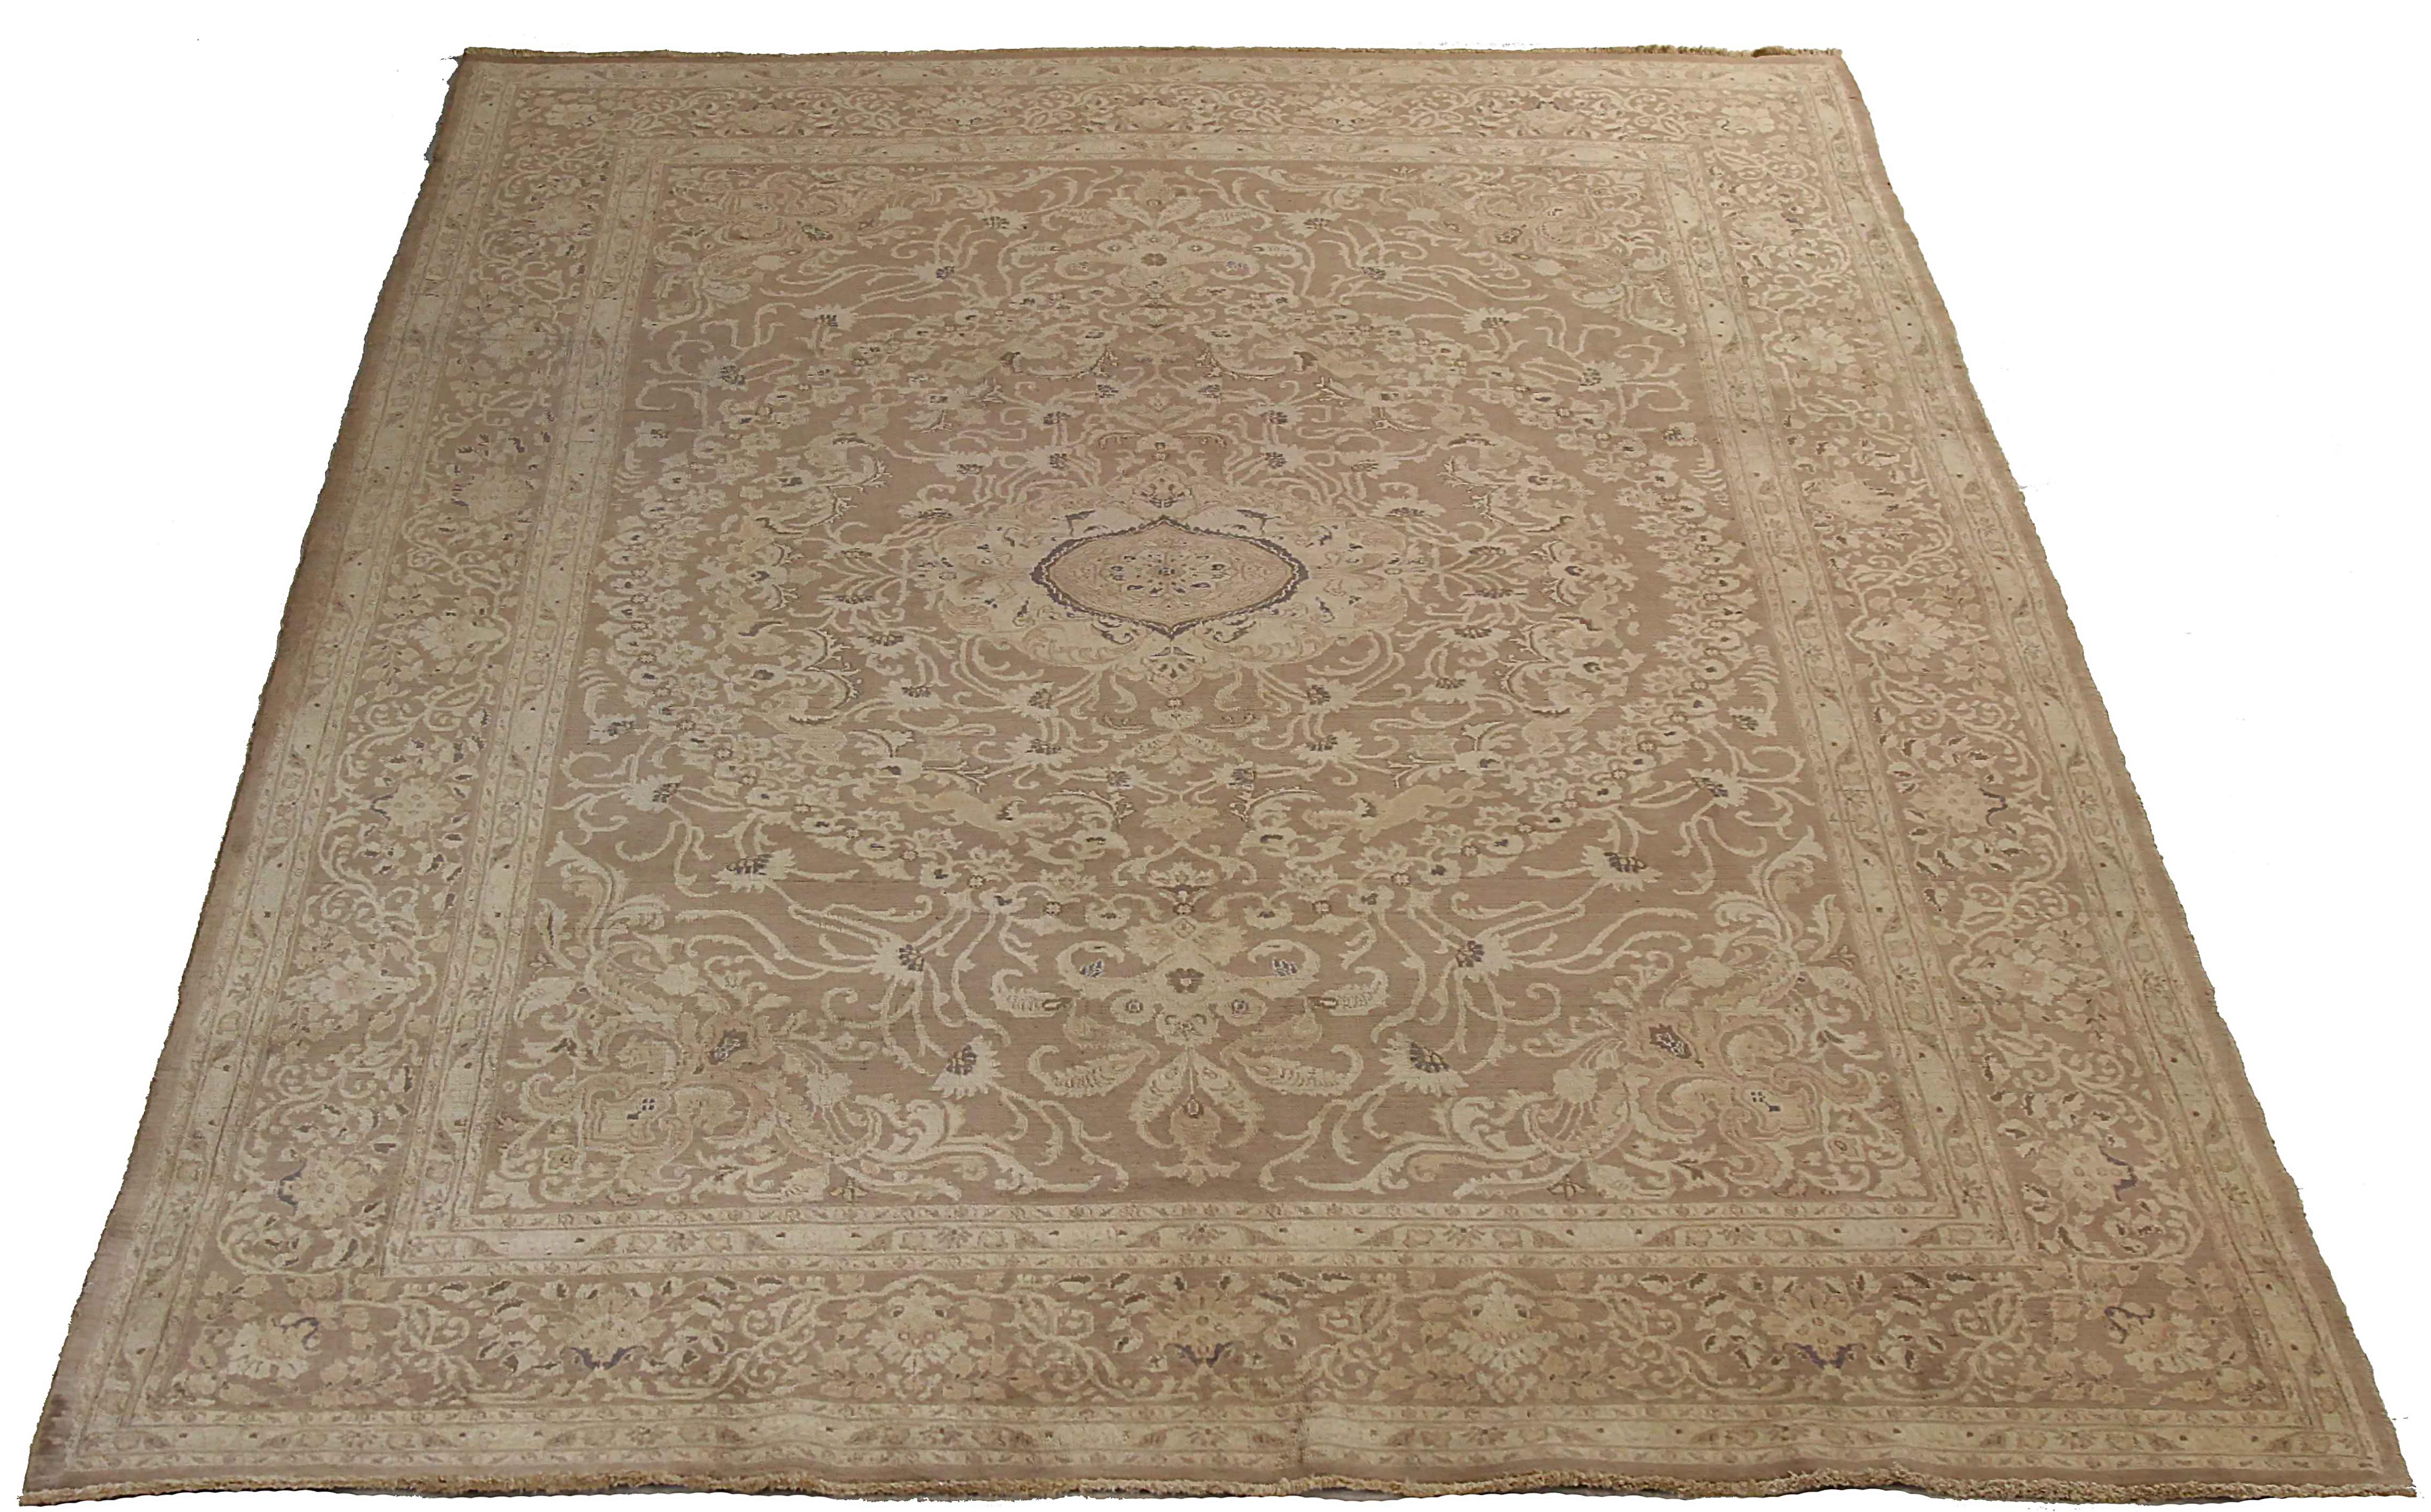 Antique Persian area rug handmade from the highest quality of sheep wool. It’s colored with eco-friendly vegetable dyes that are safe for humans and pets alike. It’s a traditional Dorokhsh design handwoven by expert artisans. It’s a lovely area rug